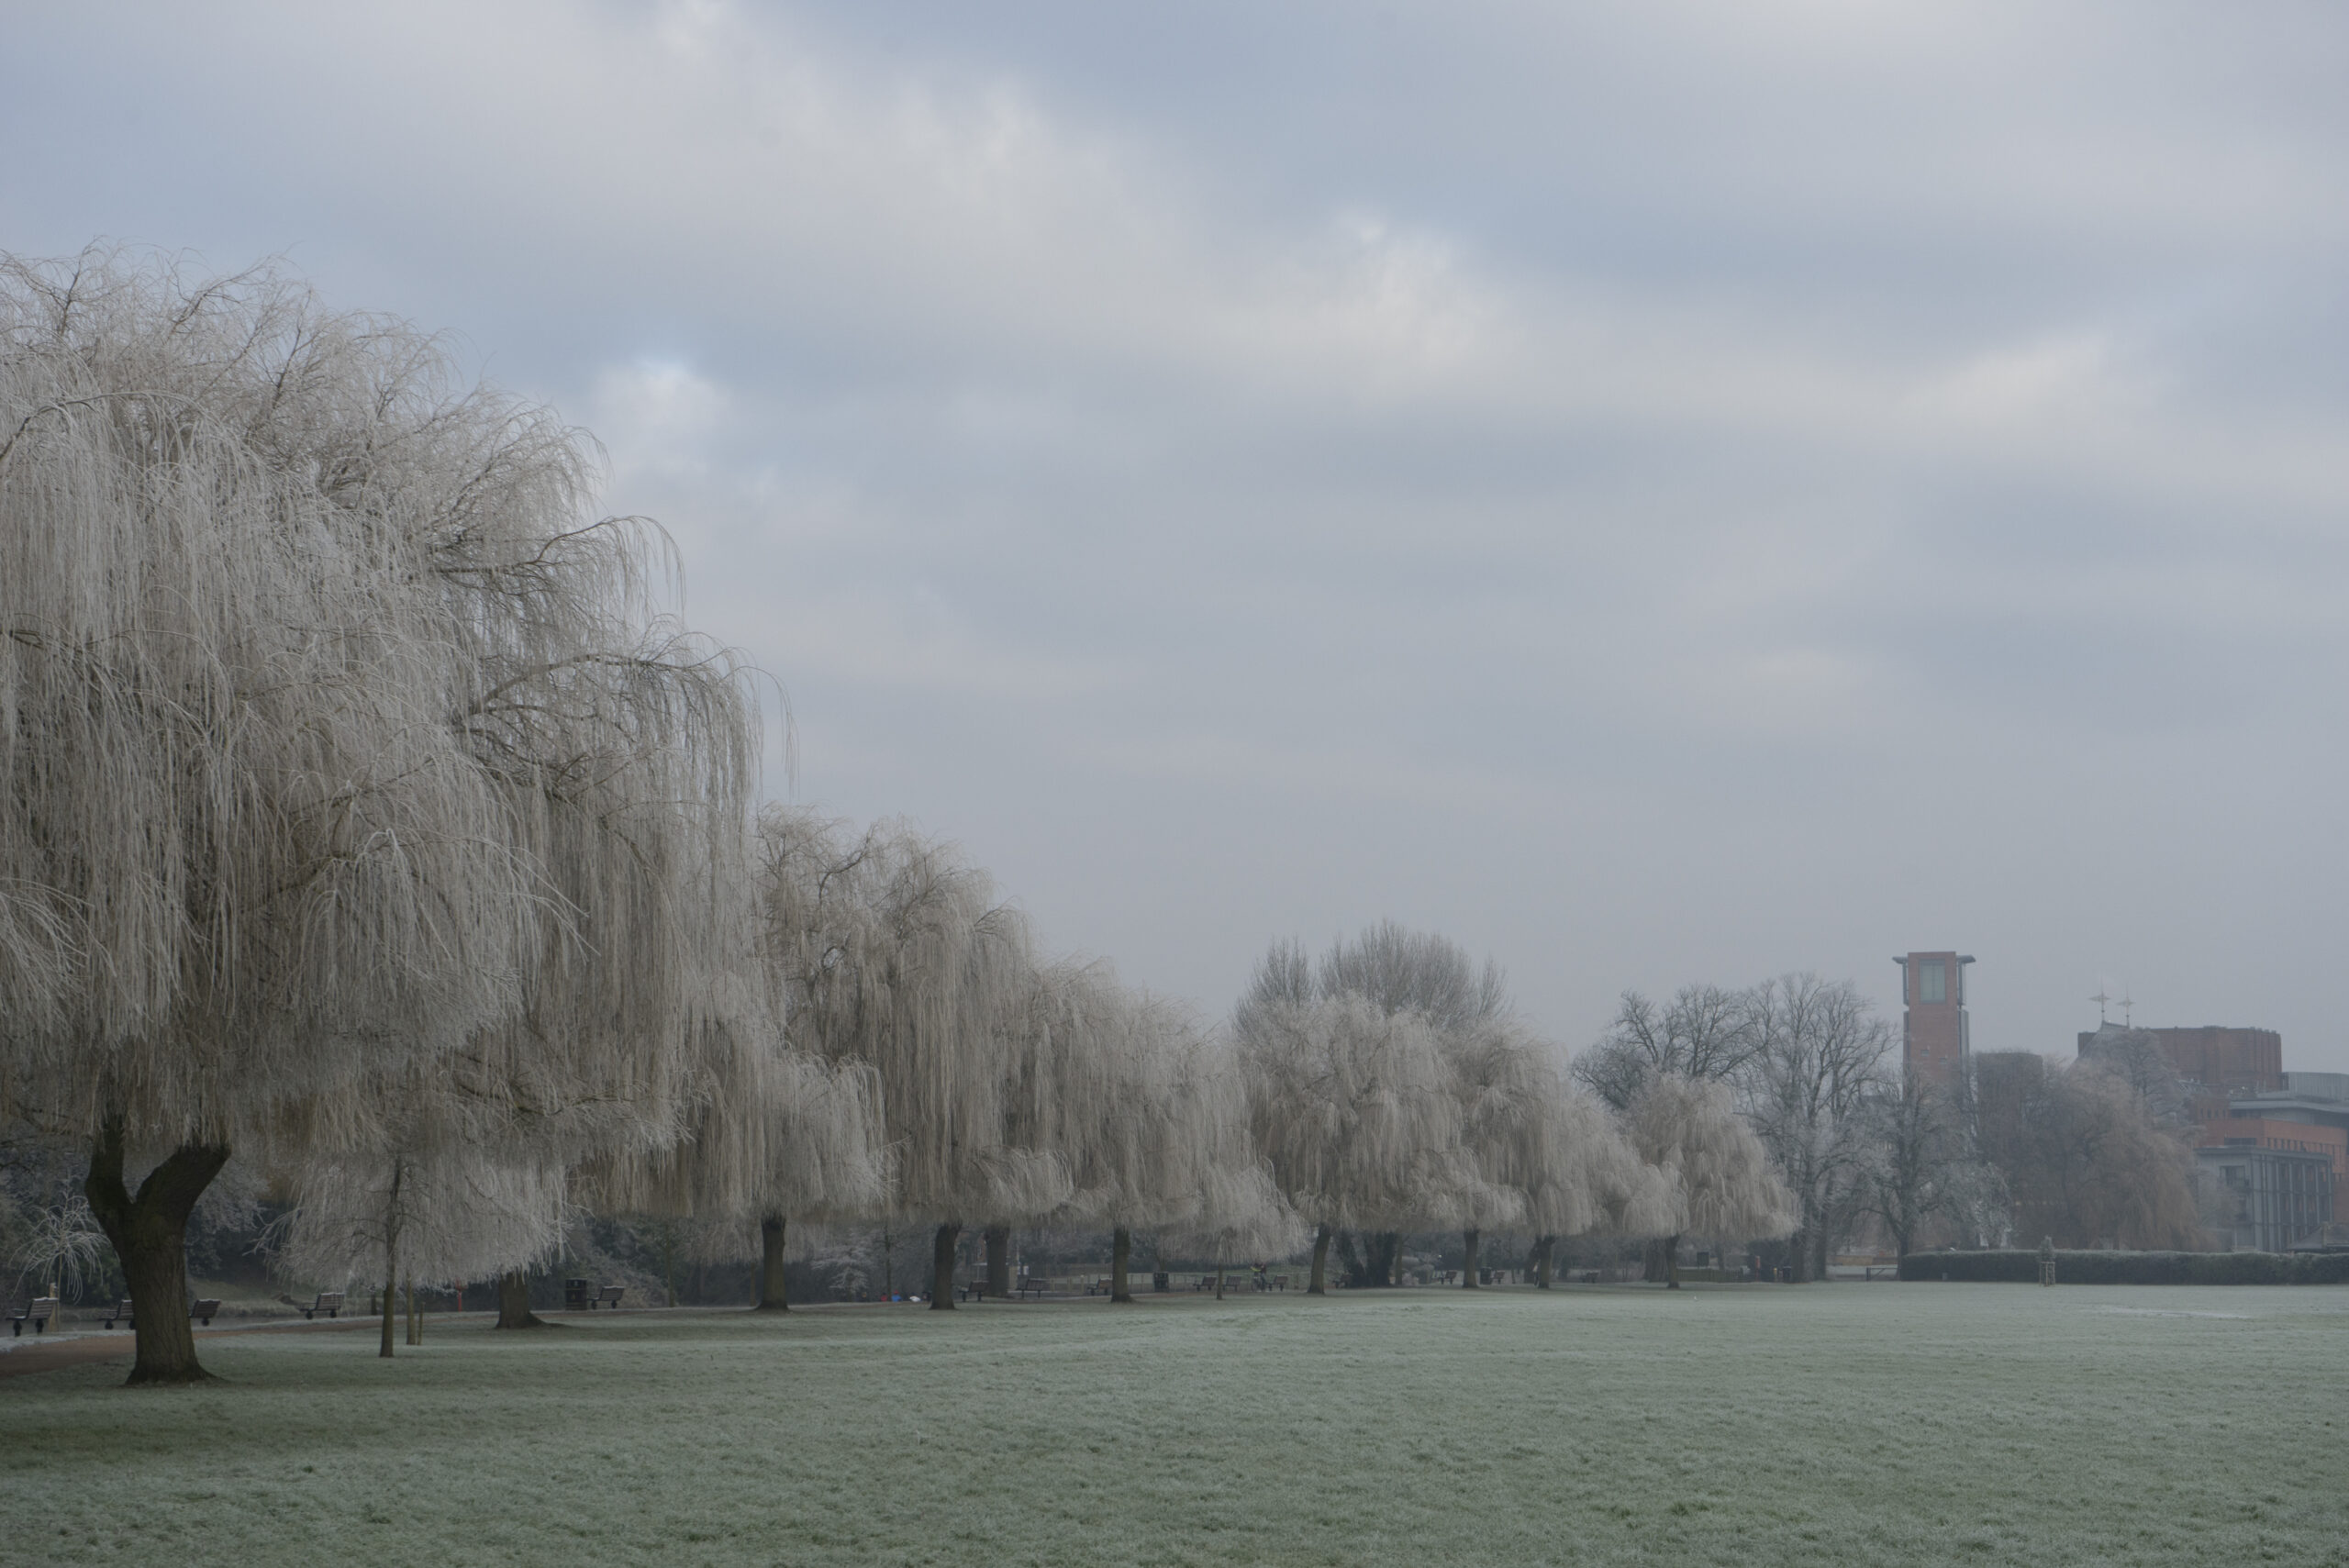 FROST on trees with RSC in background